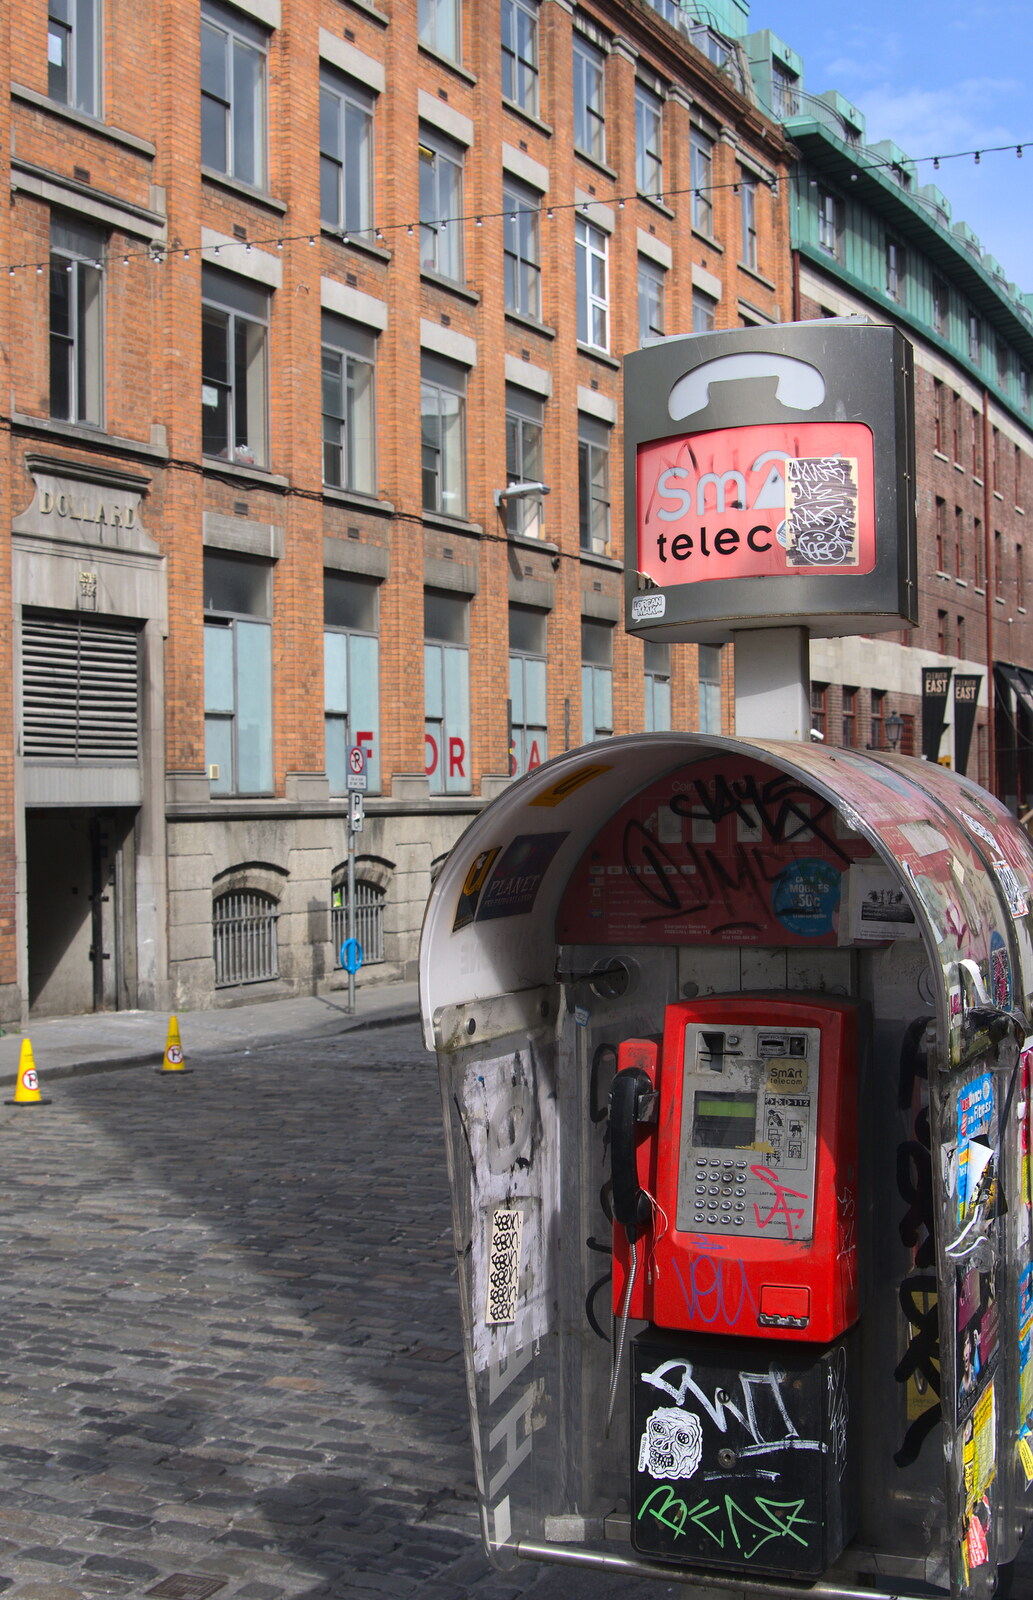 The stickery phone booth from Temple Bar and Dun Laoghaire, Dublin, Ireland - 16th April 2015